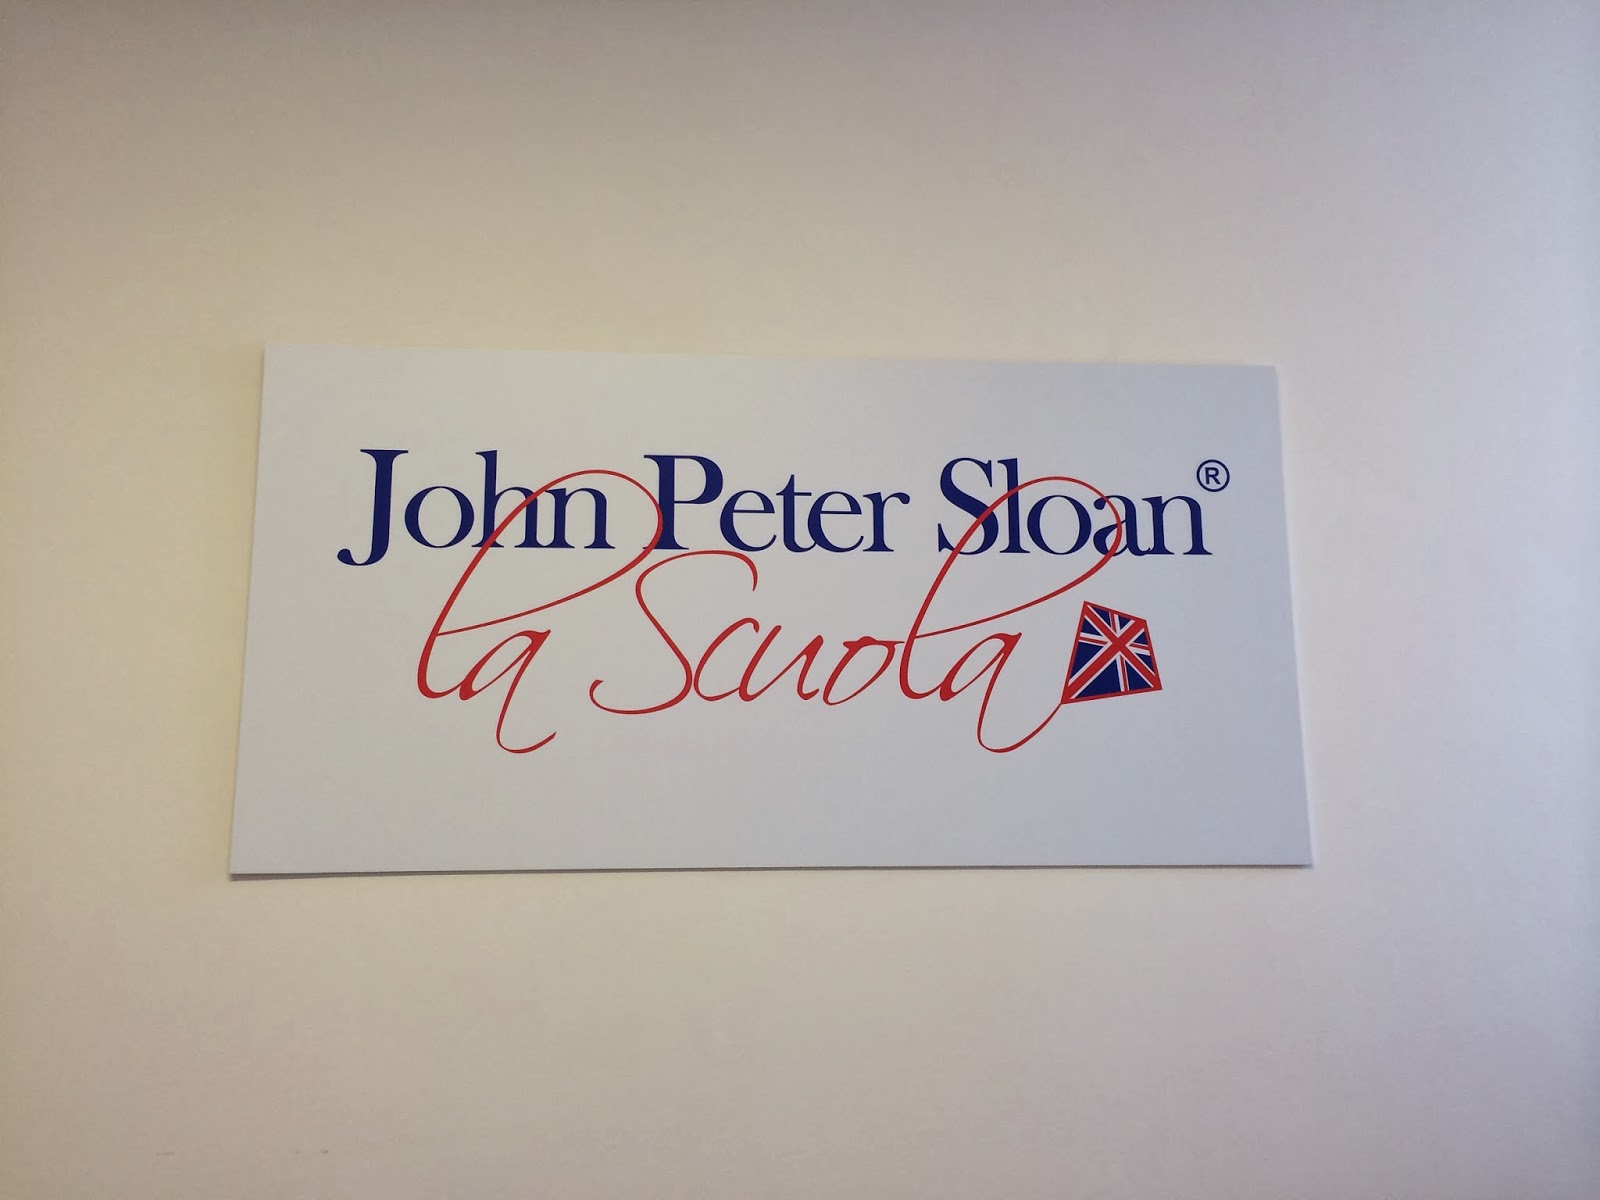 John_Peter_Sloan_The_School_inglese_english_lessons_english_course